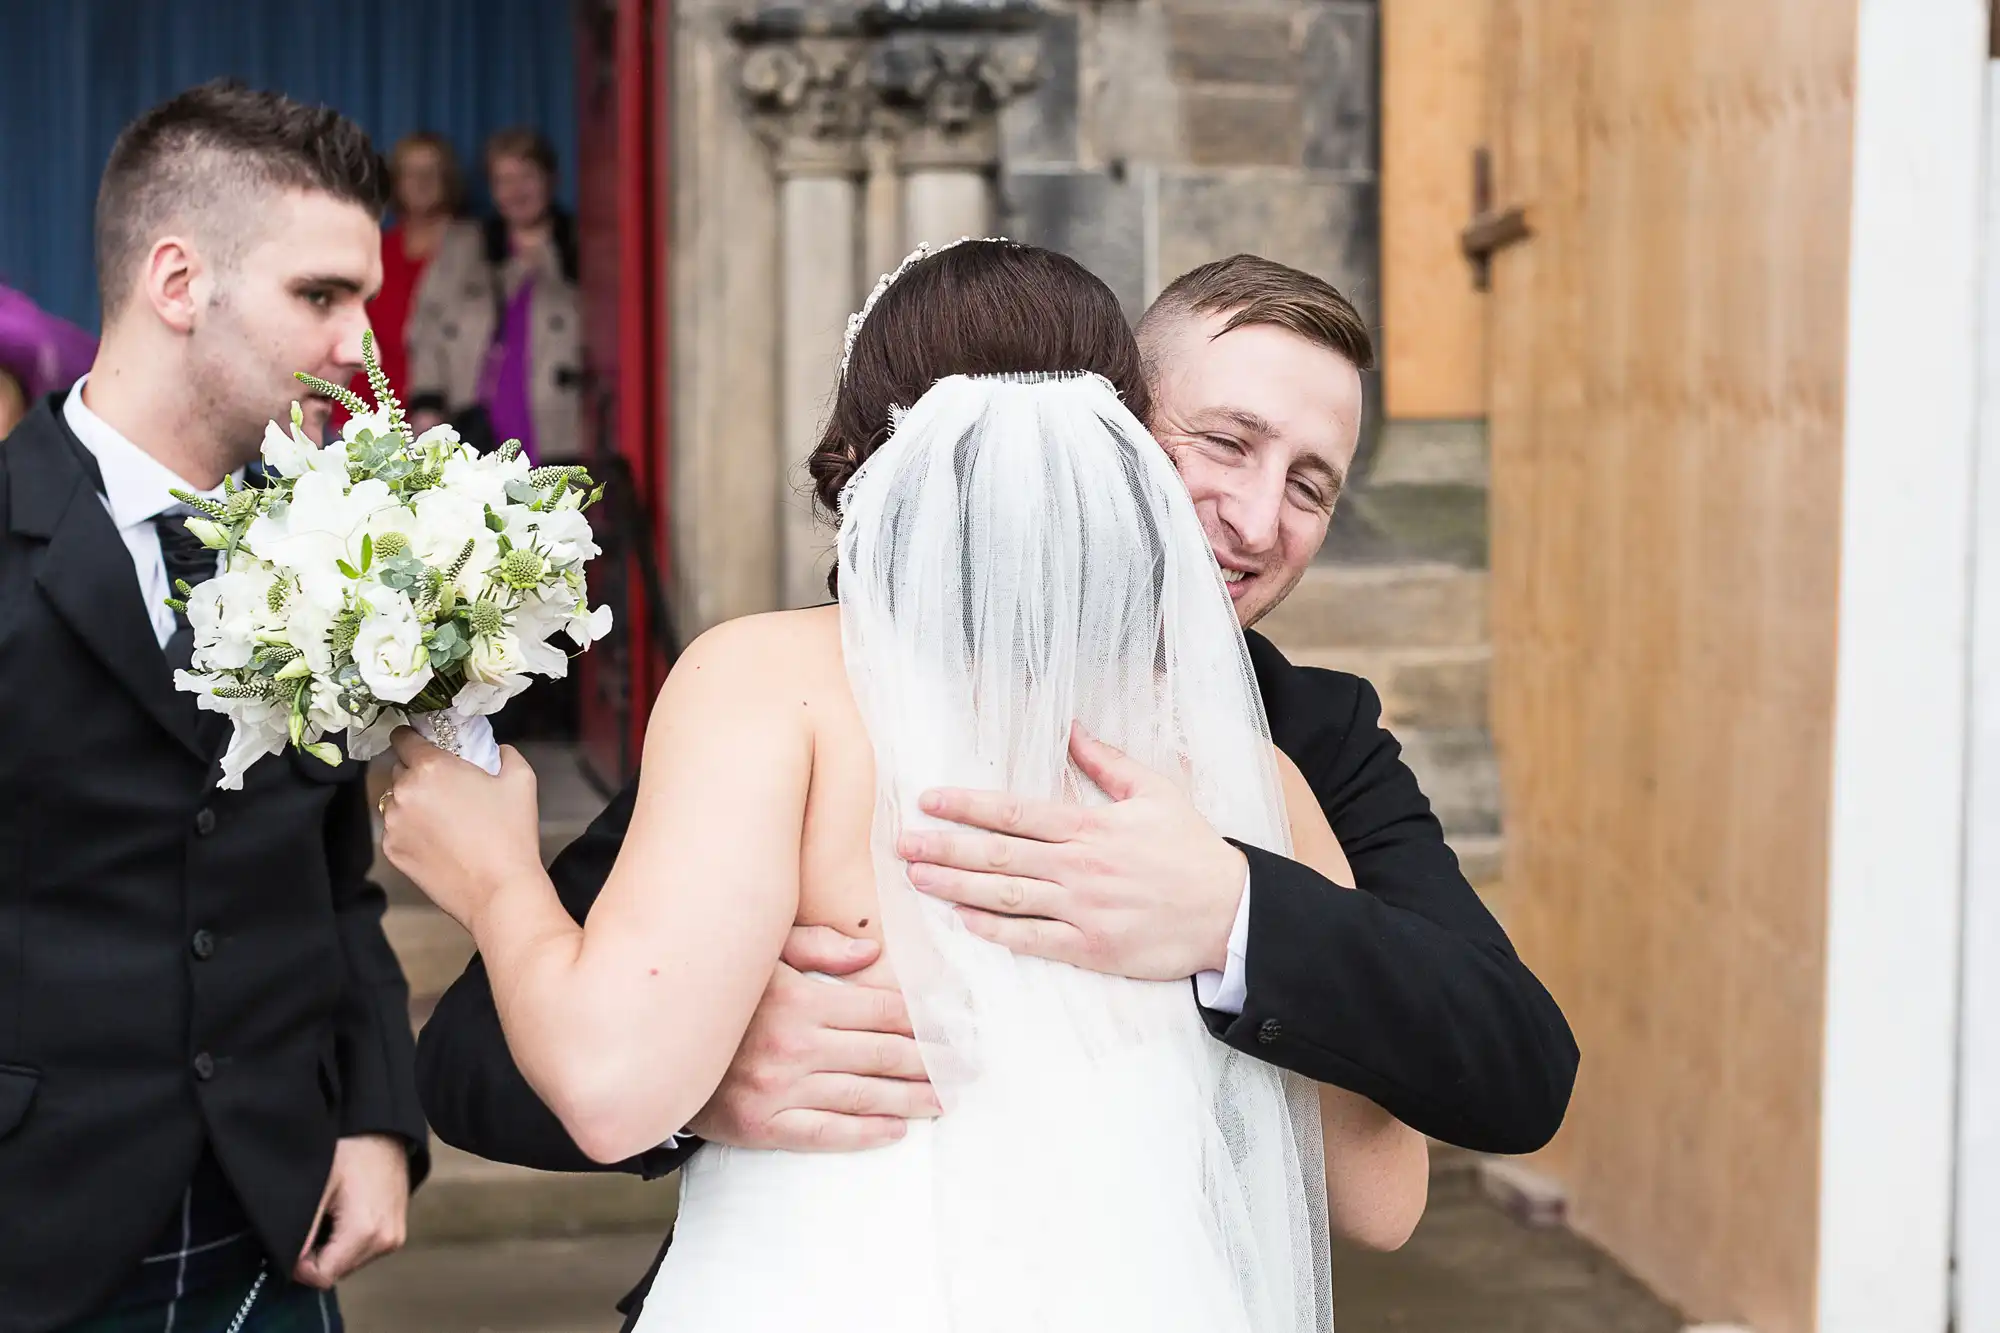 A bride and groom embracing outside a church, the groom smiling joyfully, with guests in the background.